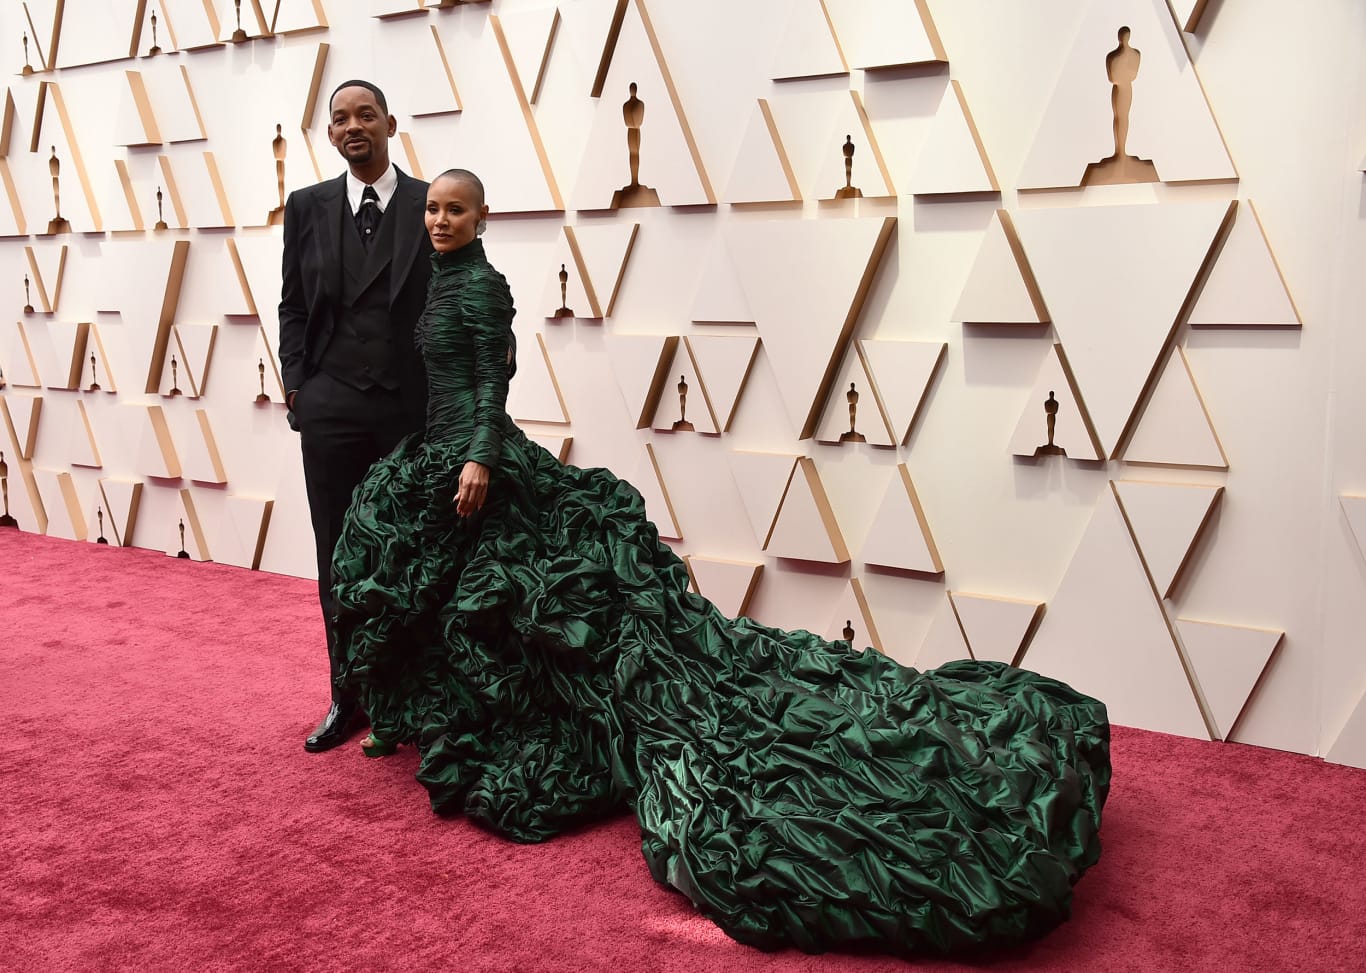 Will Smith, who won Best Actor for his role as Richard Williams in "King Richard," arrived on the carpet wearing Dolce & Gabbana, accompanied with Jada Pinkett Smith in a voluminous emerald green gown.